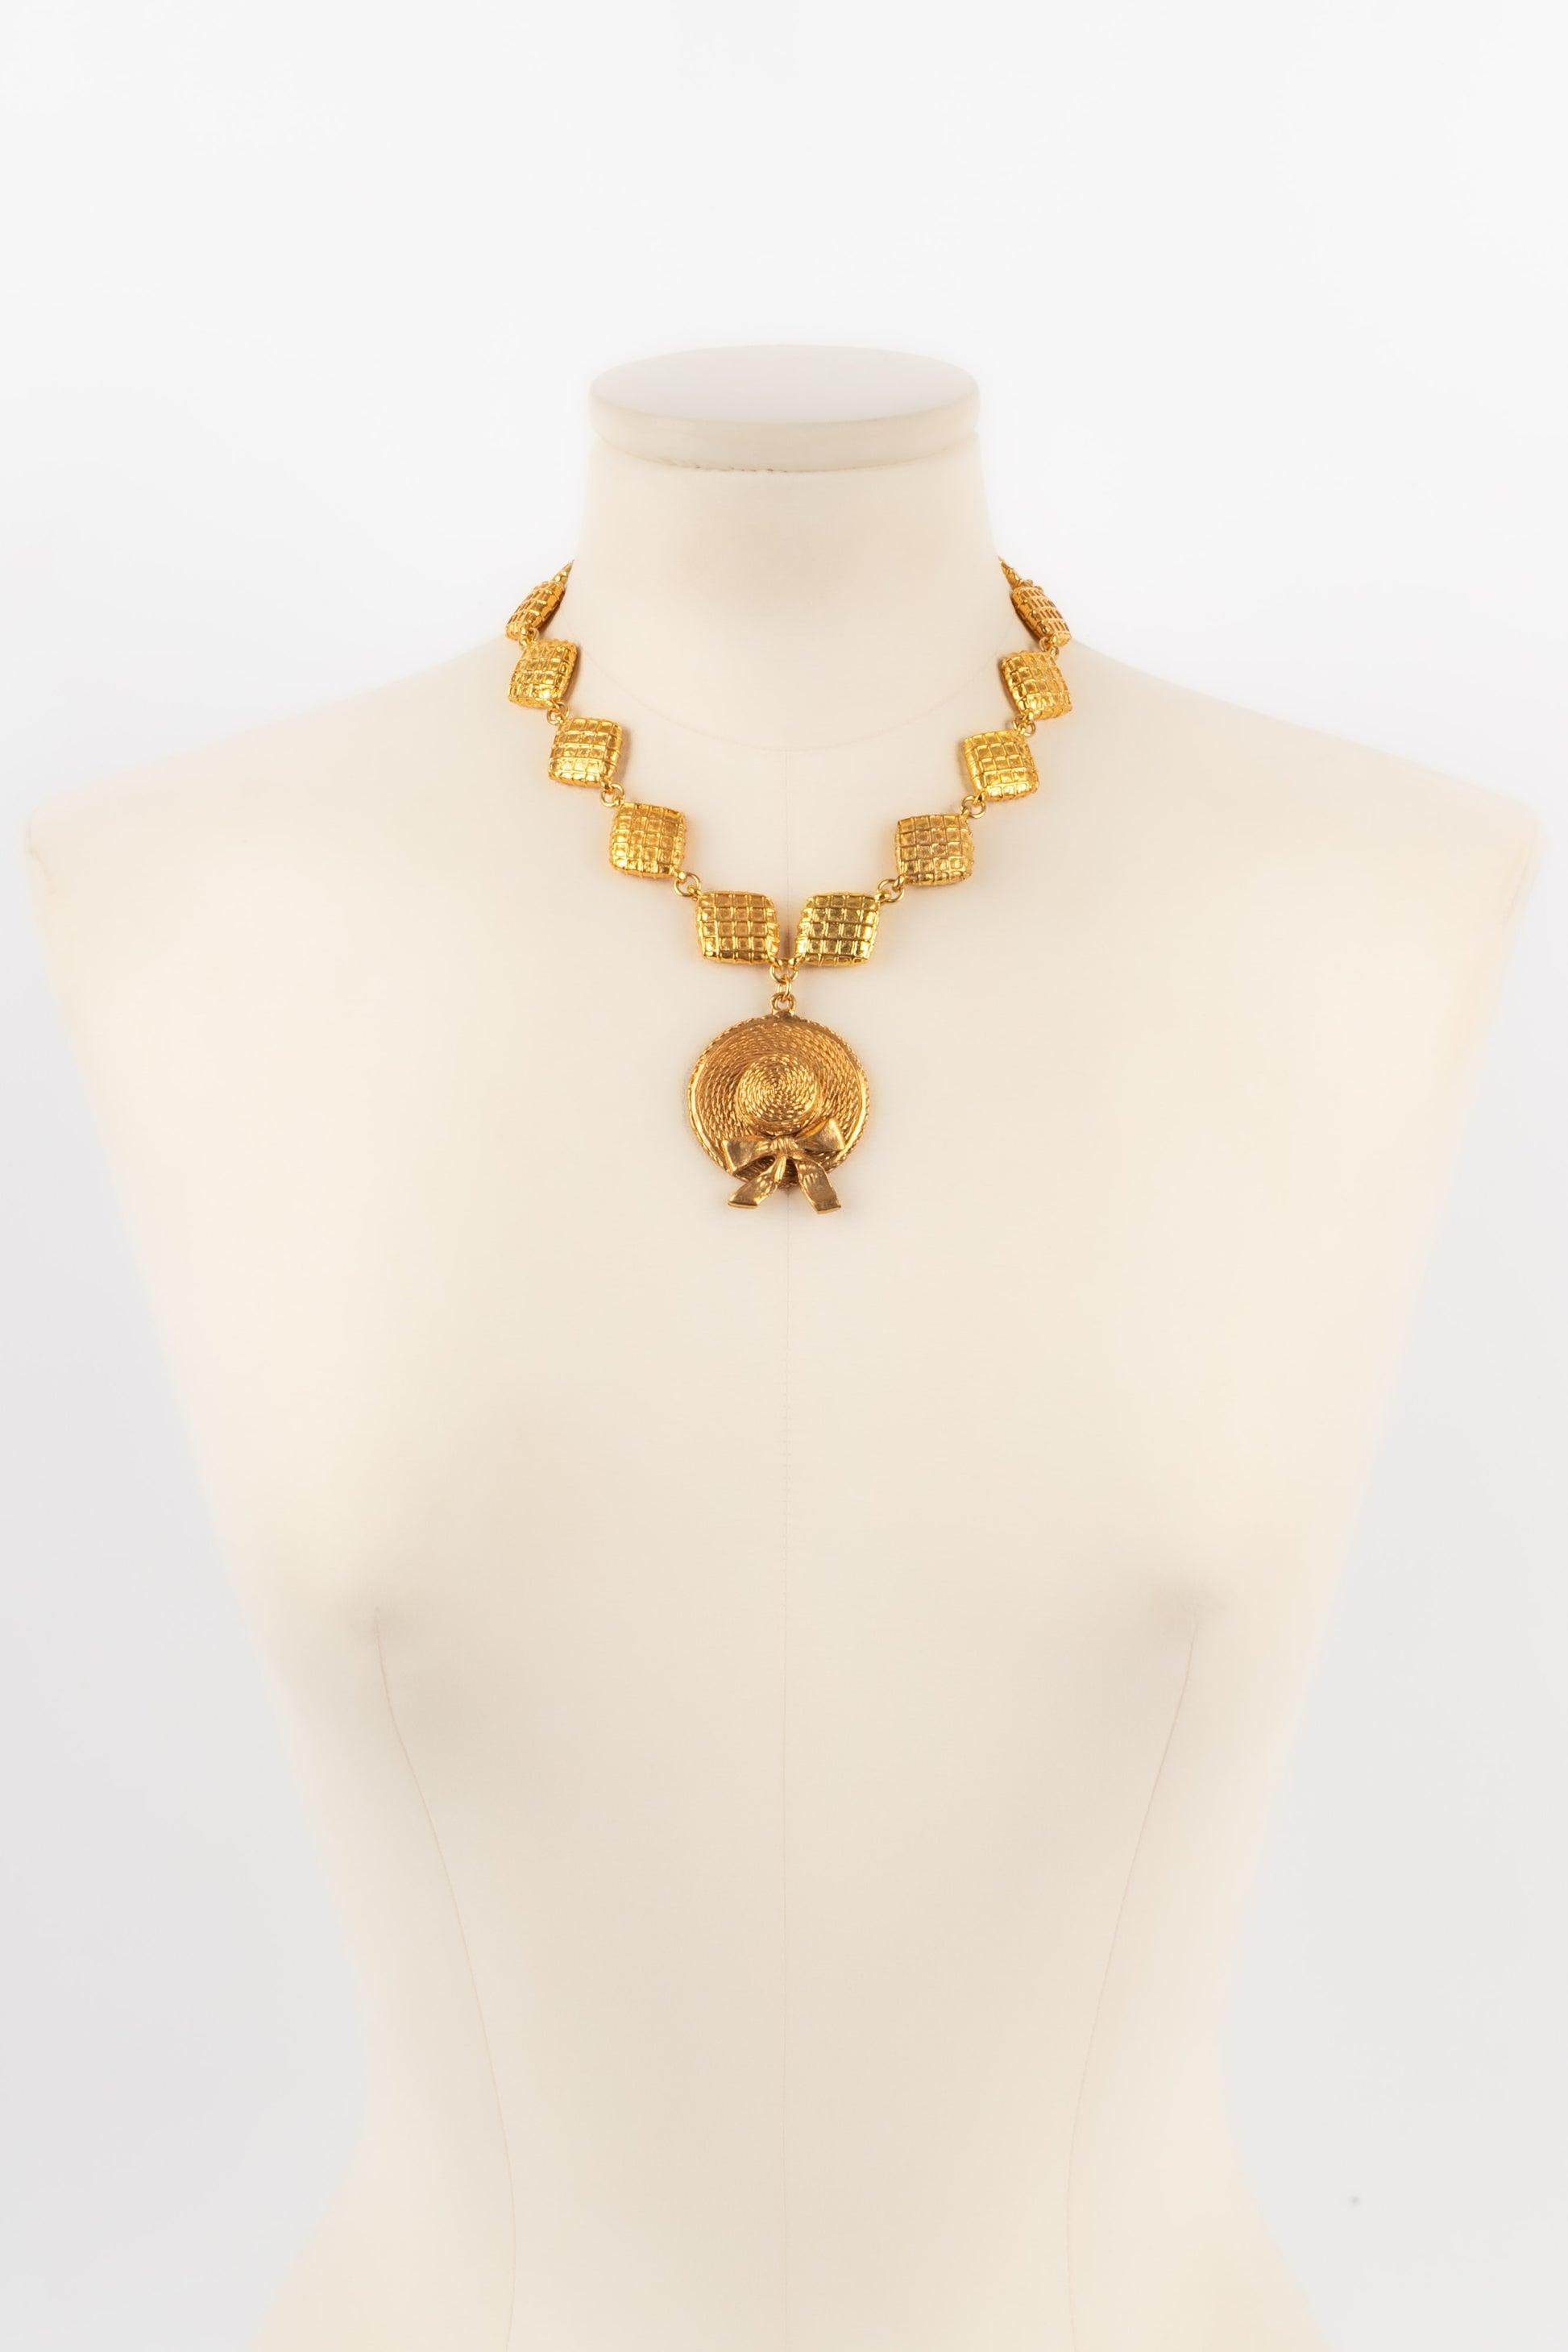 Chanel - (Made in France) Necklace in golden metal with quilted elements and centered with a hat. Jewelry from the beginning of the 1990s.

Additional information:
Condition: Very good condition 
Dimensions: Length: 42 cm

Seller Reference: CB217
